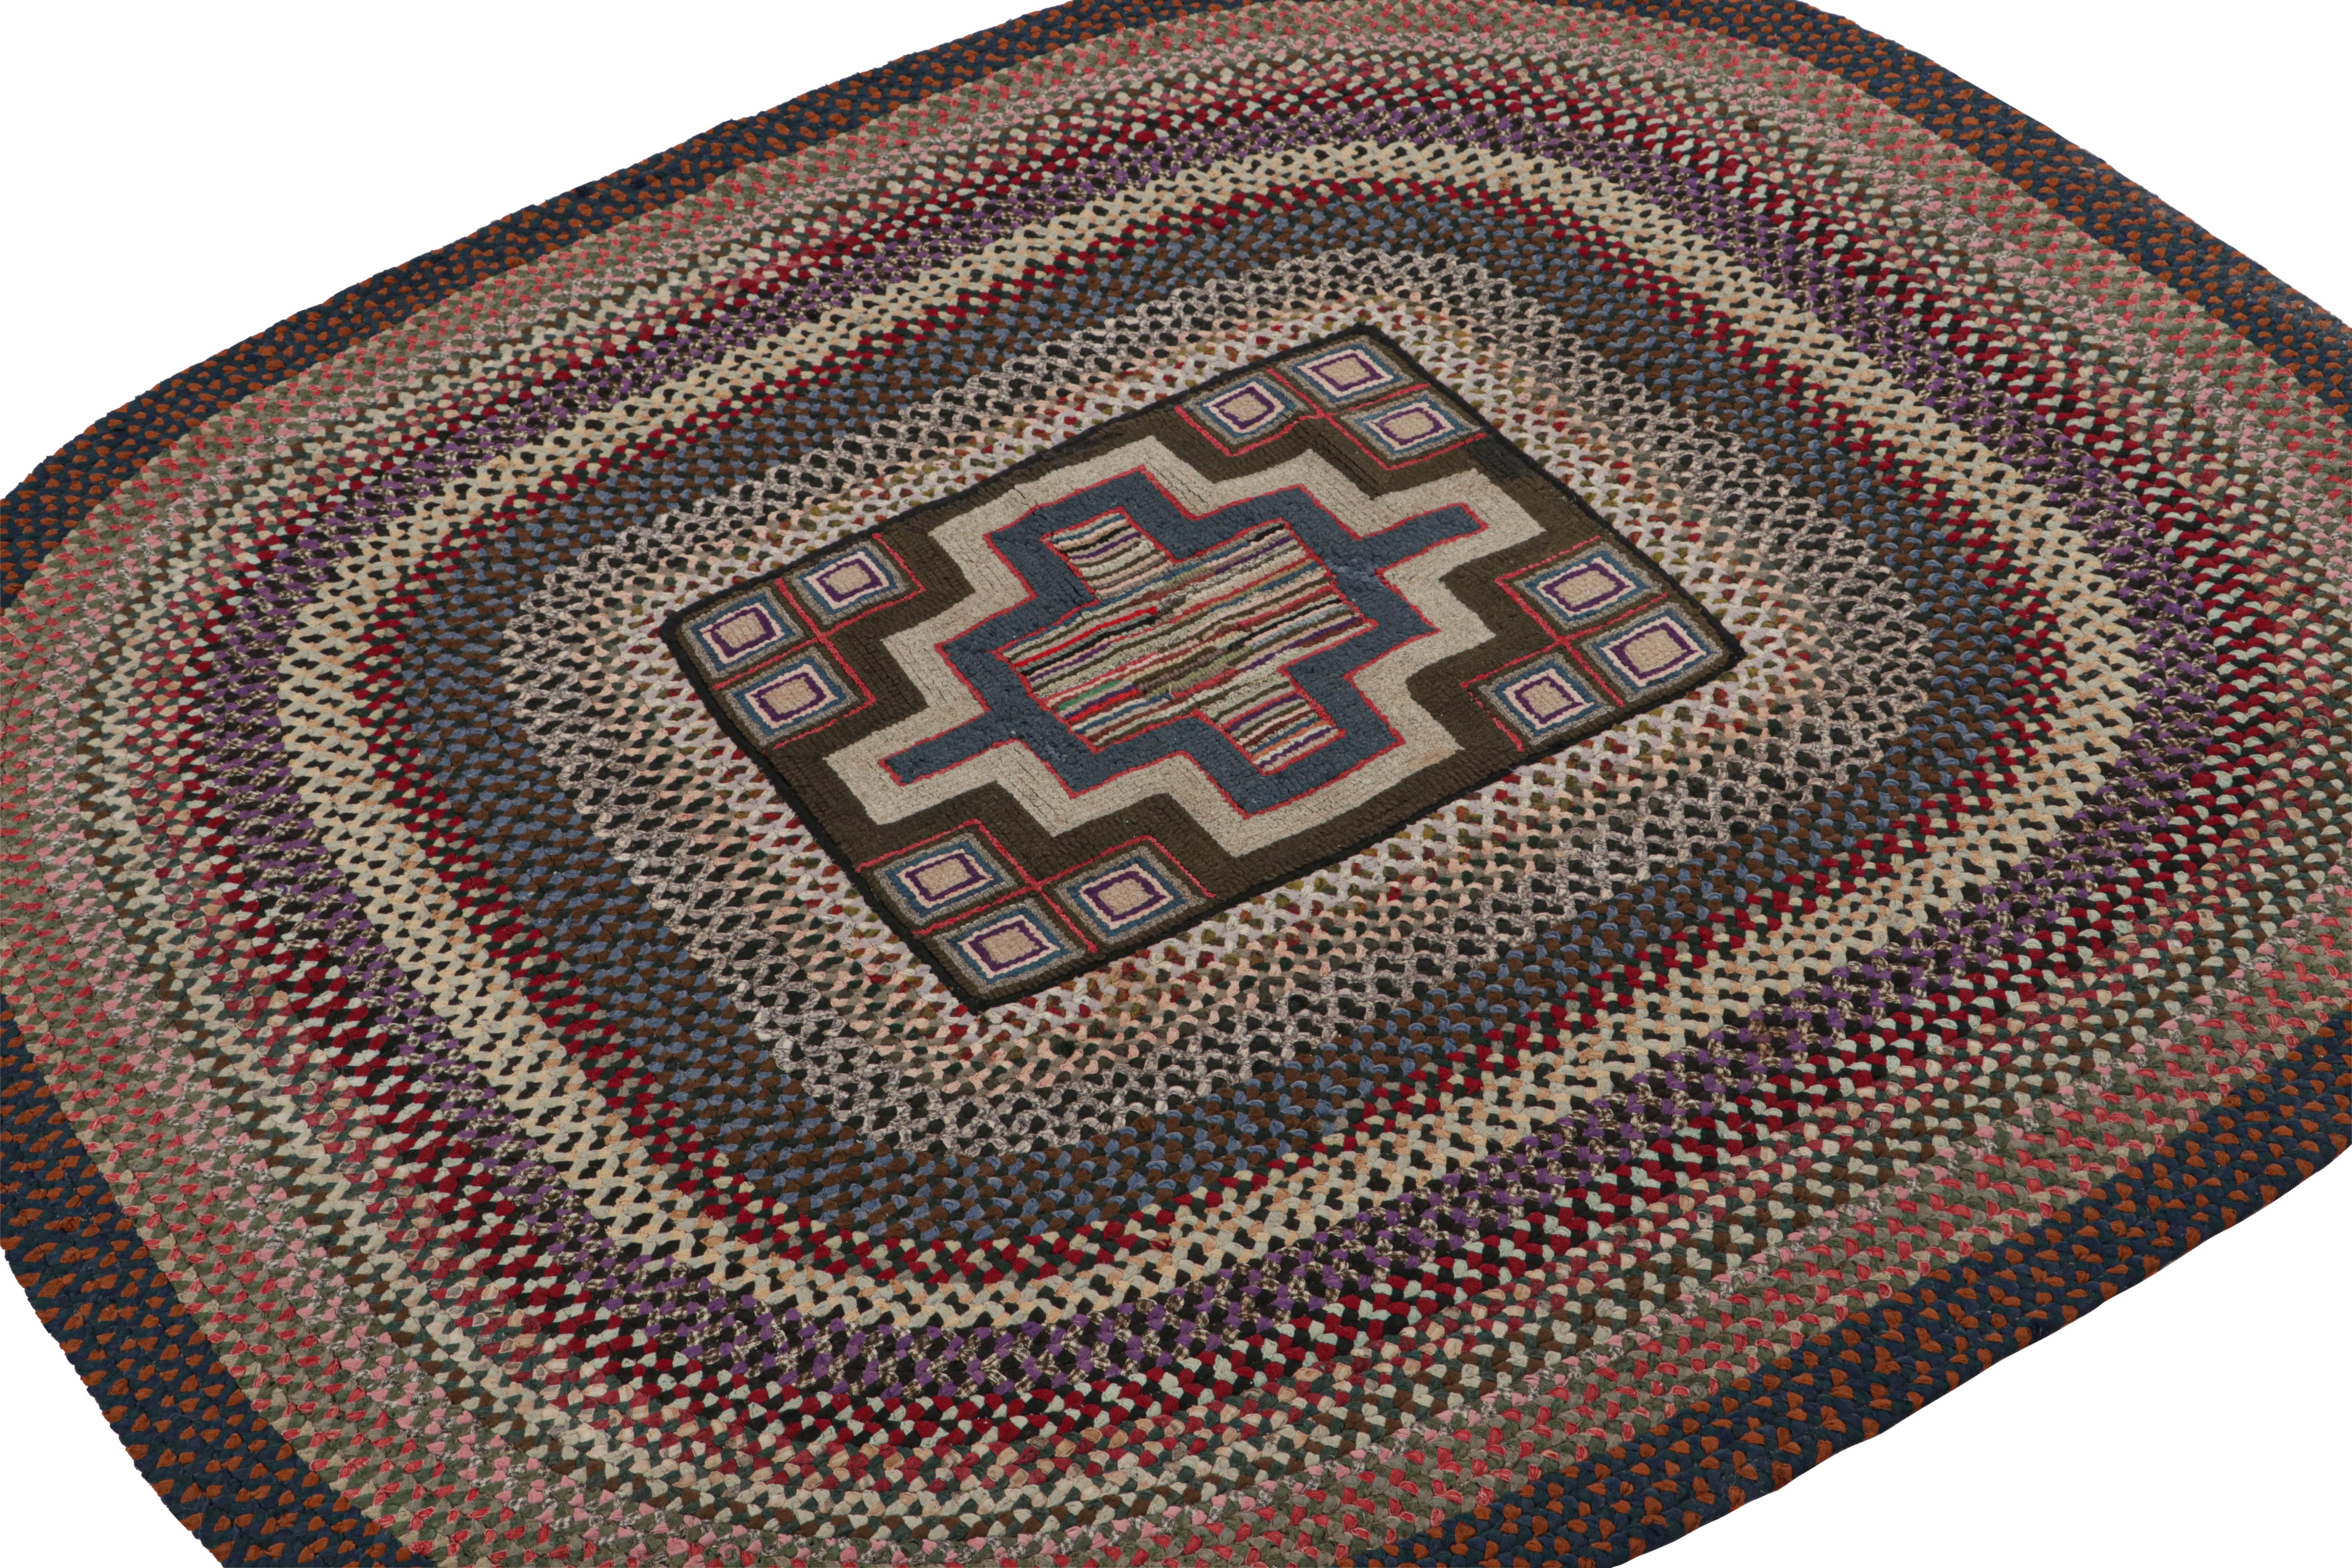 A rare 4x5 antique hooked oval rug of United States’ provenance, handmade in wool and fabric, circa 1920-1930, featuring polychromatic braided stripes and geometric patterns. 

On the Design: 

This collectible piece enjoys layers of geometric